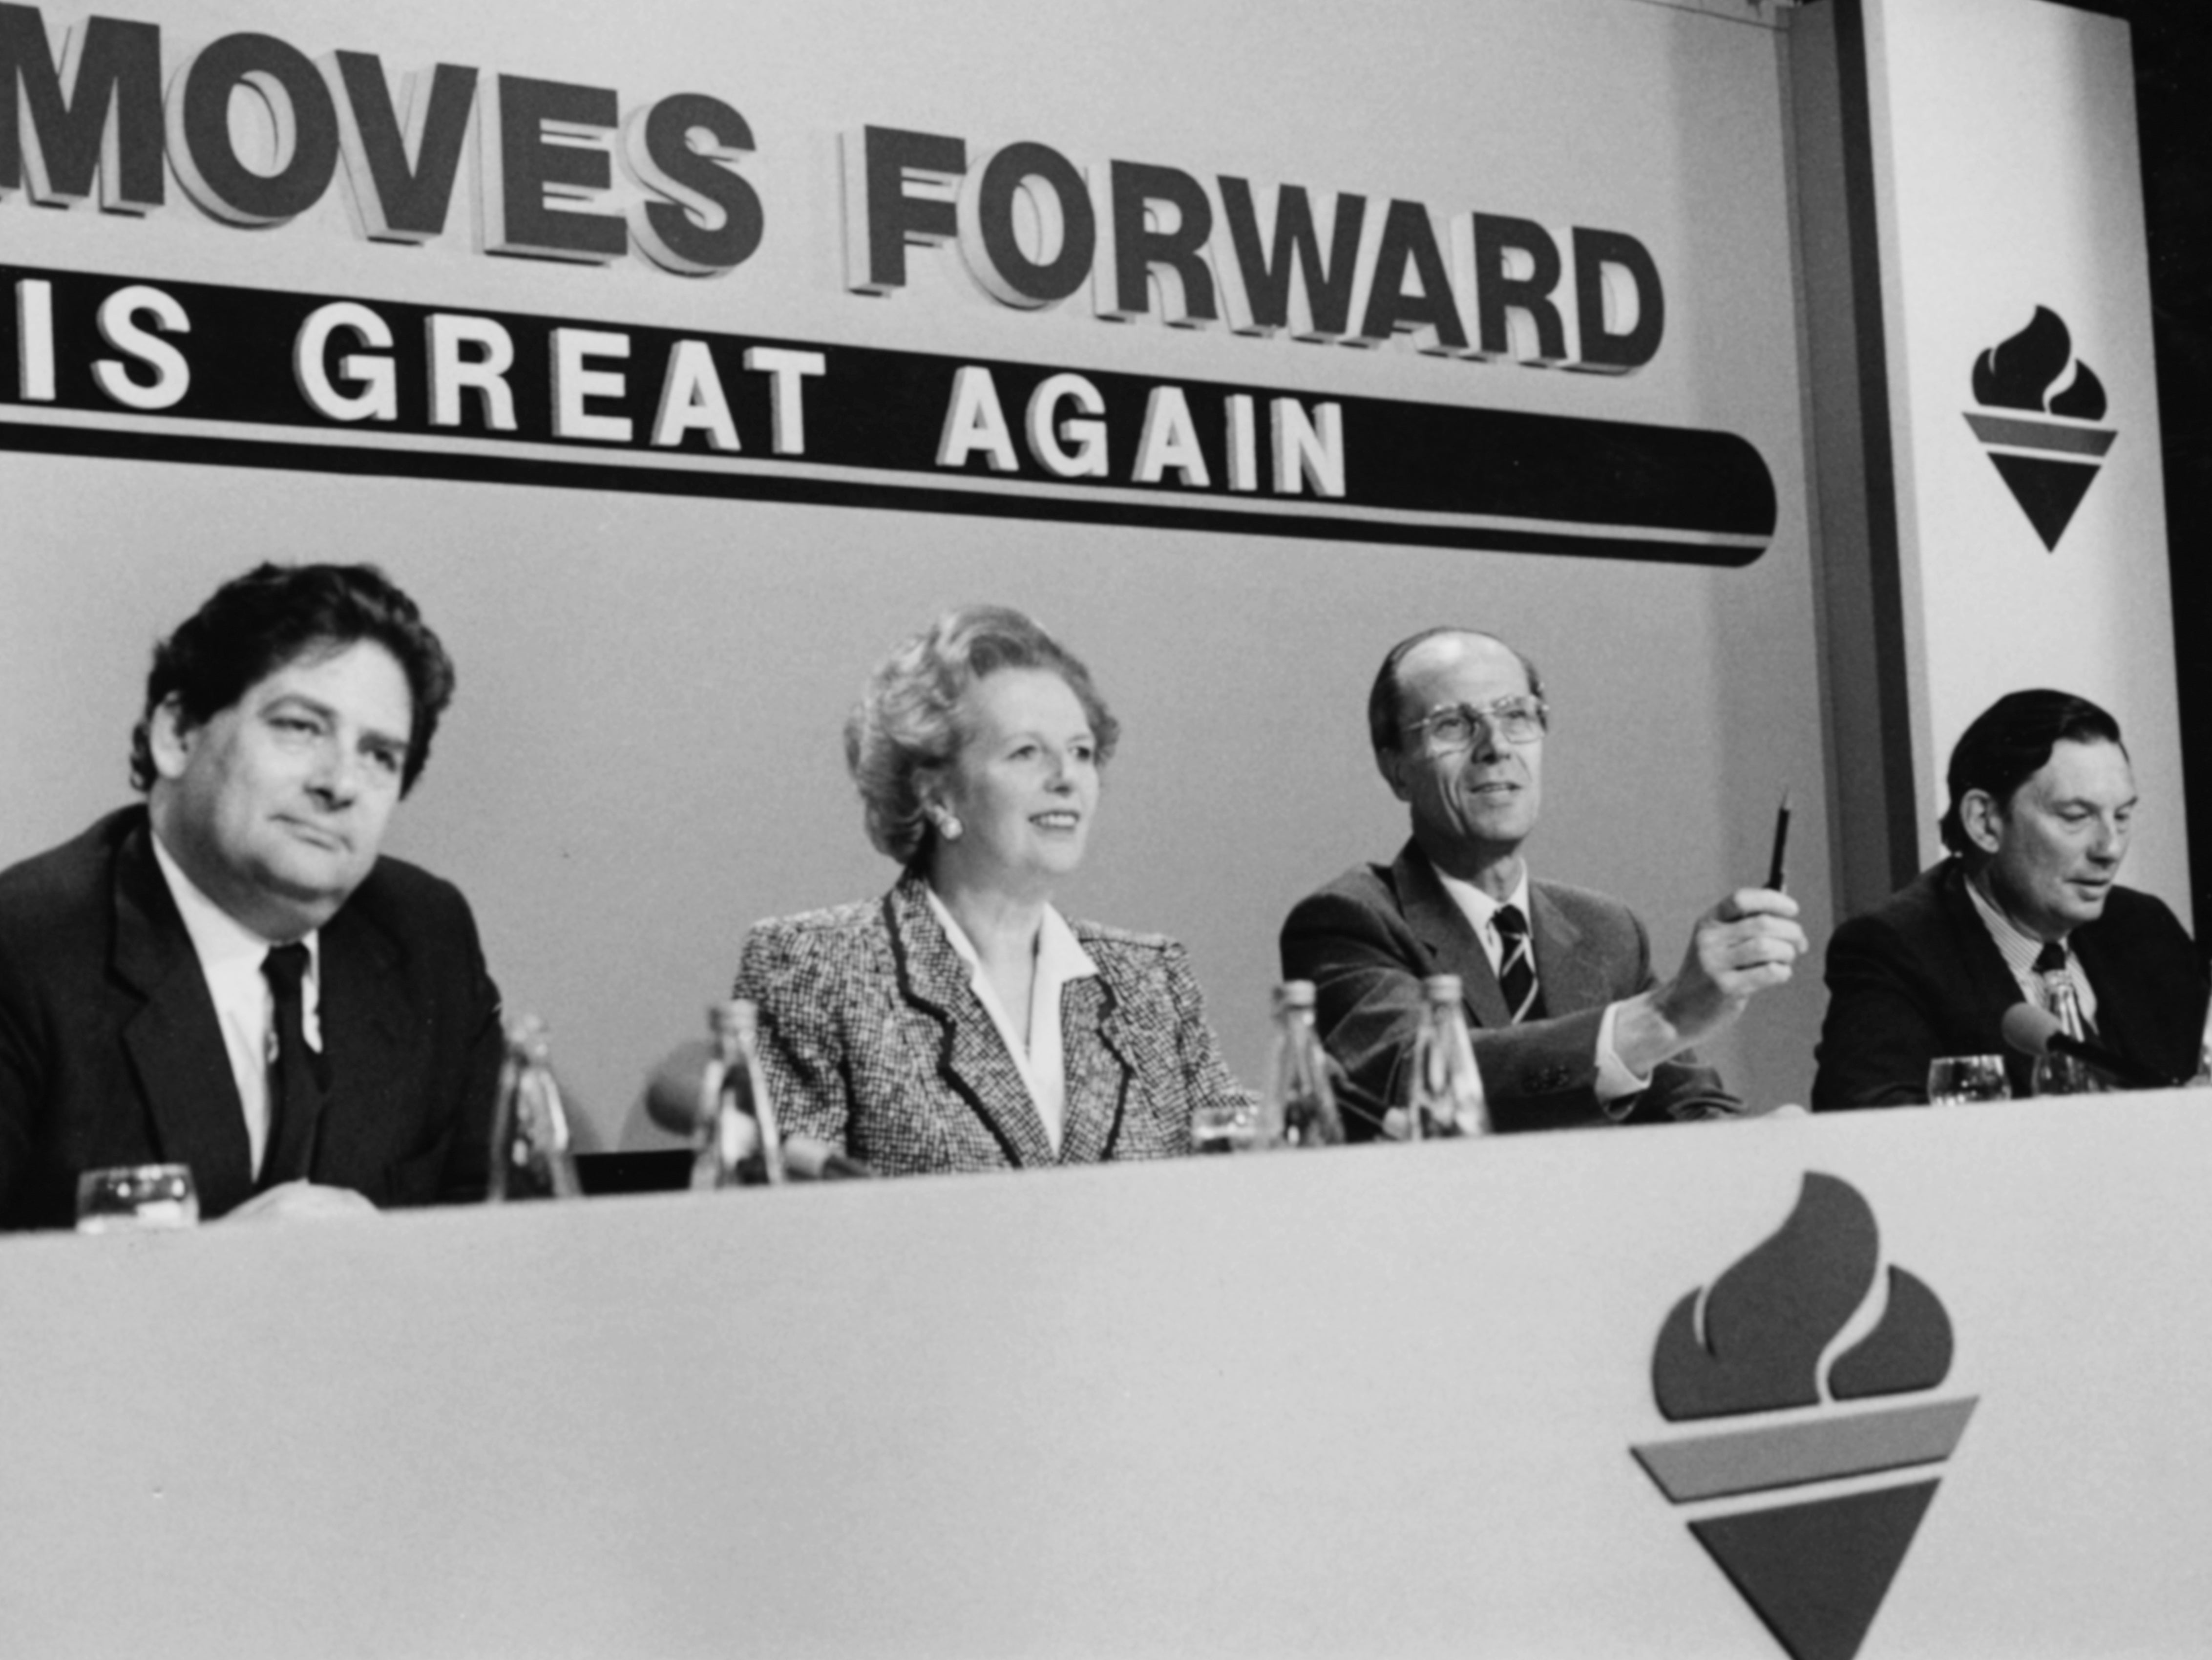 Lawson with, from left, Margaret Thatcher, Norman Tebbit and Paul Channon at an election conference in June 1987